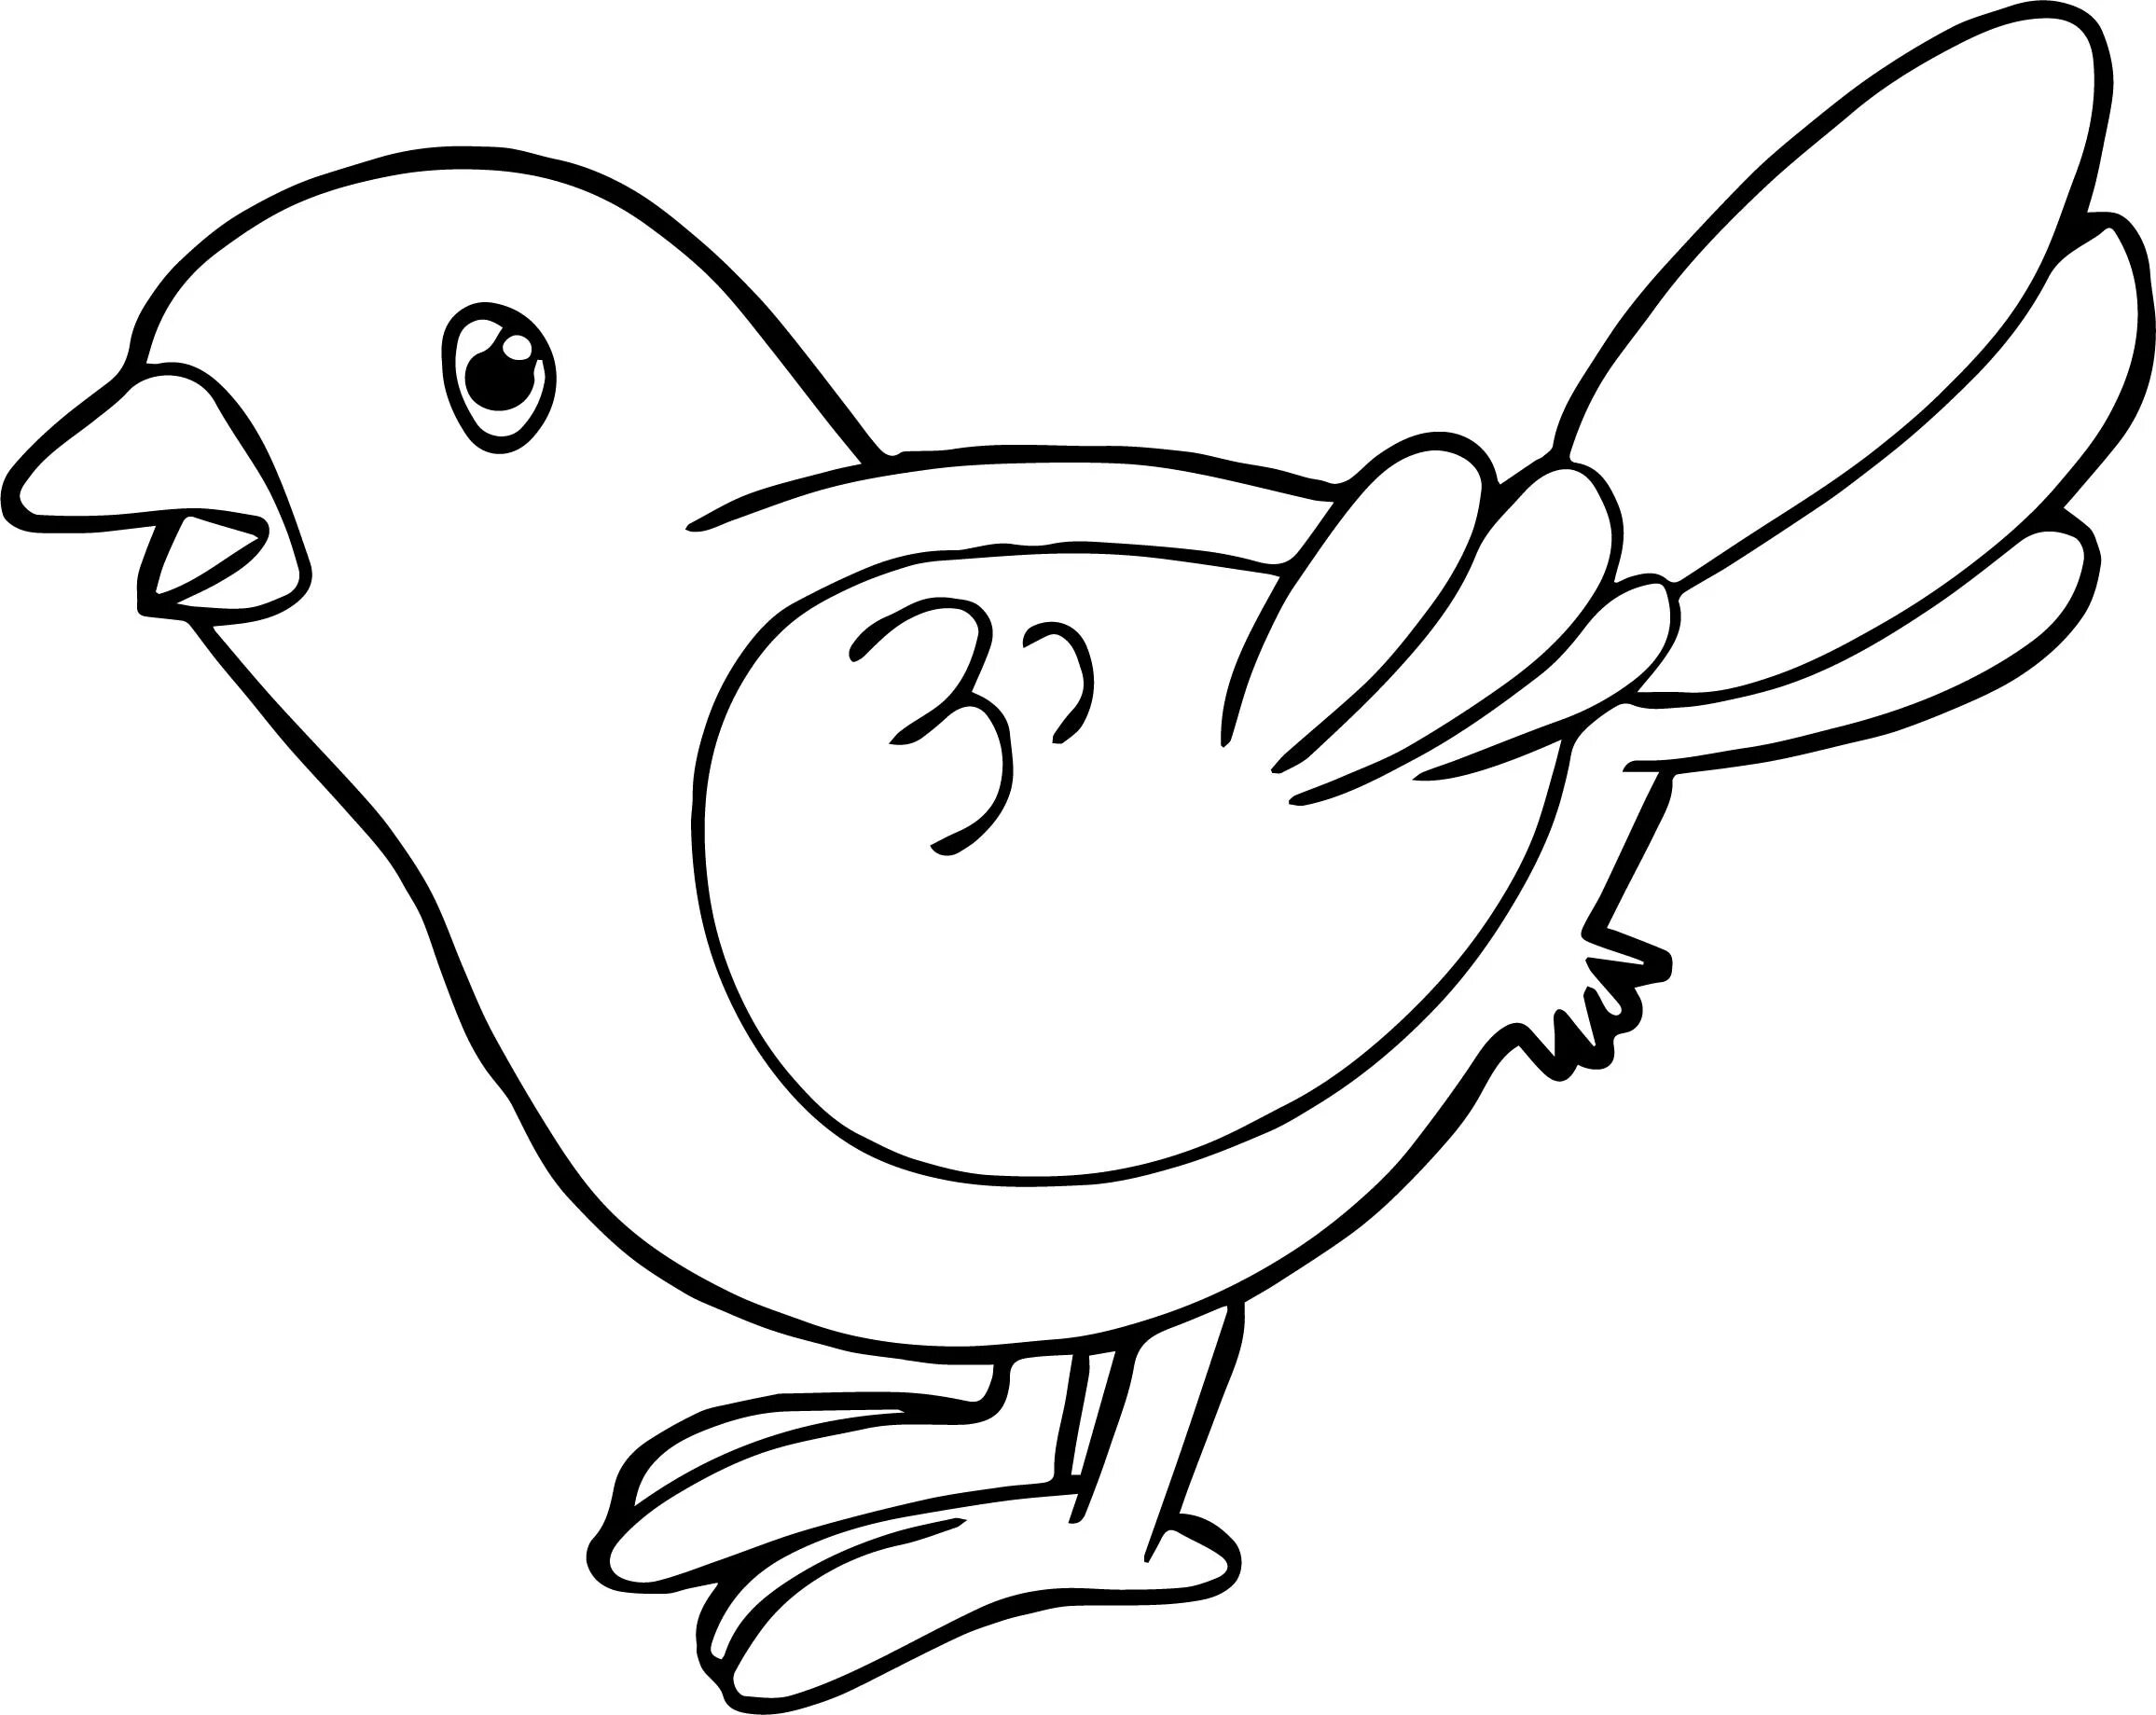 Coloring book gorgeous bird for 2-3 year olds